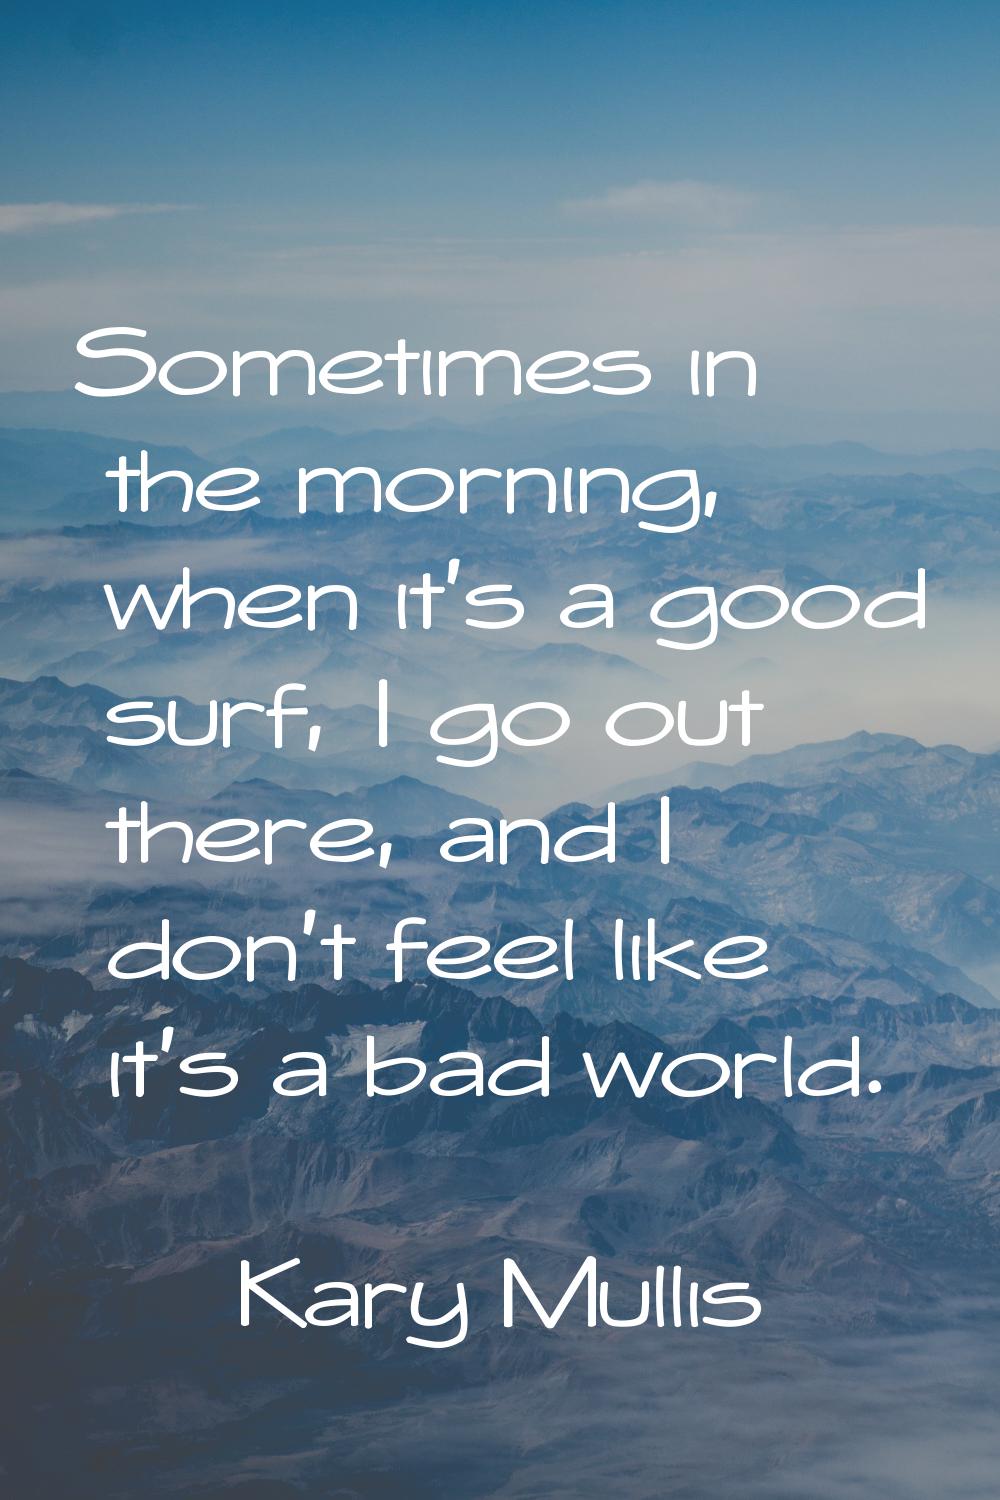 Sometimes in the morning, when it's a good surf, I go out there, and I don't feel like it's a bad w